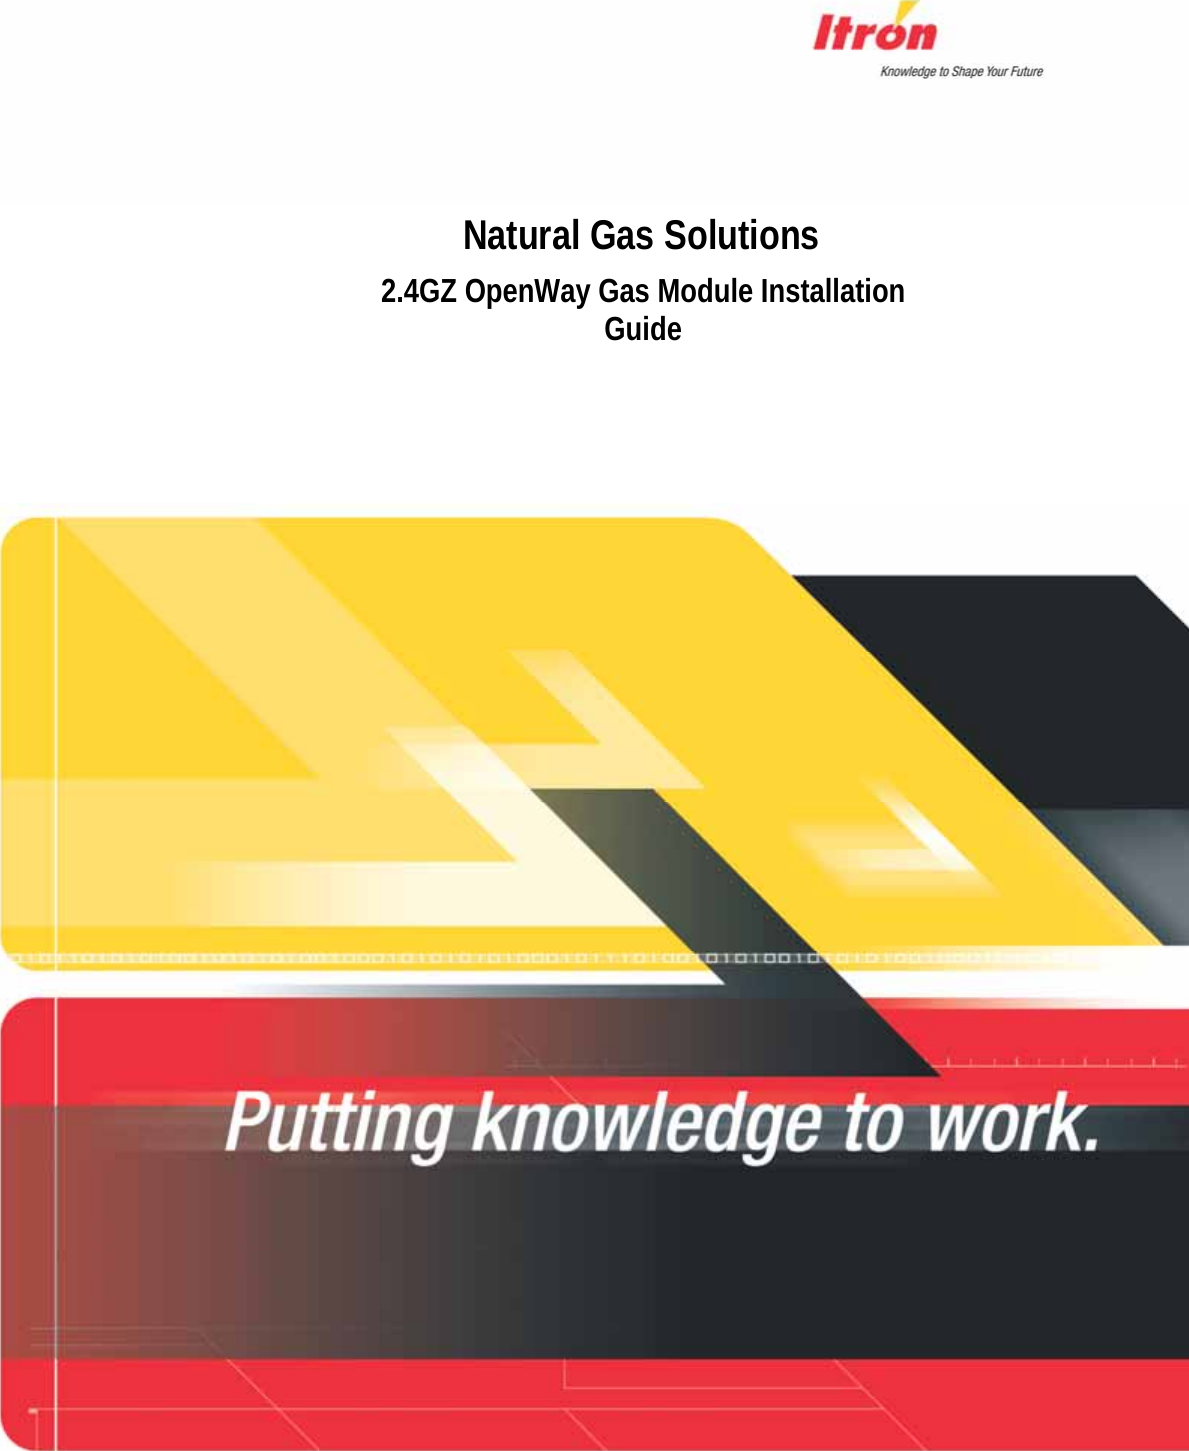    Natural Gas Solutions 2.4GZ OpenWay Gas Module Installation Guide      